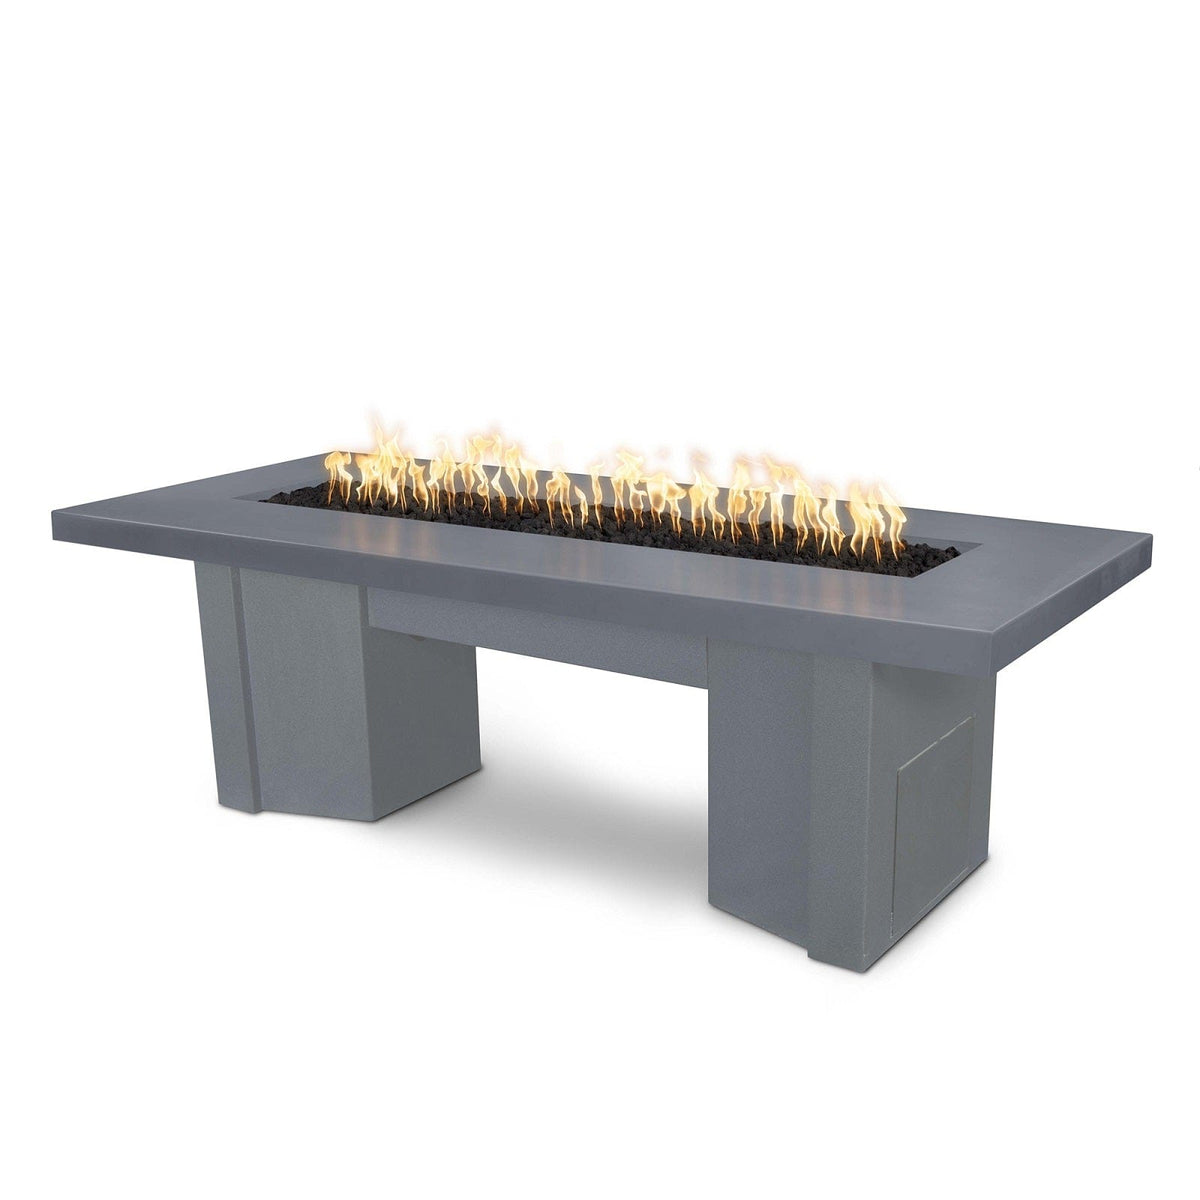 The Outdoor Plus Fire Features Gray (-GRY) / Gray Powder Coated Steel (-GRY) The Outdoor Plus 78&quot; Alameda Fire Table Smooth Concrete in Liquid Propane - Match Lit with Flame Sense System / OPT-ALMGFRC78FSML-LP